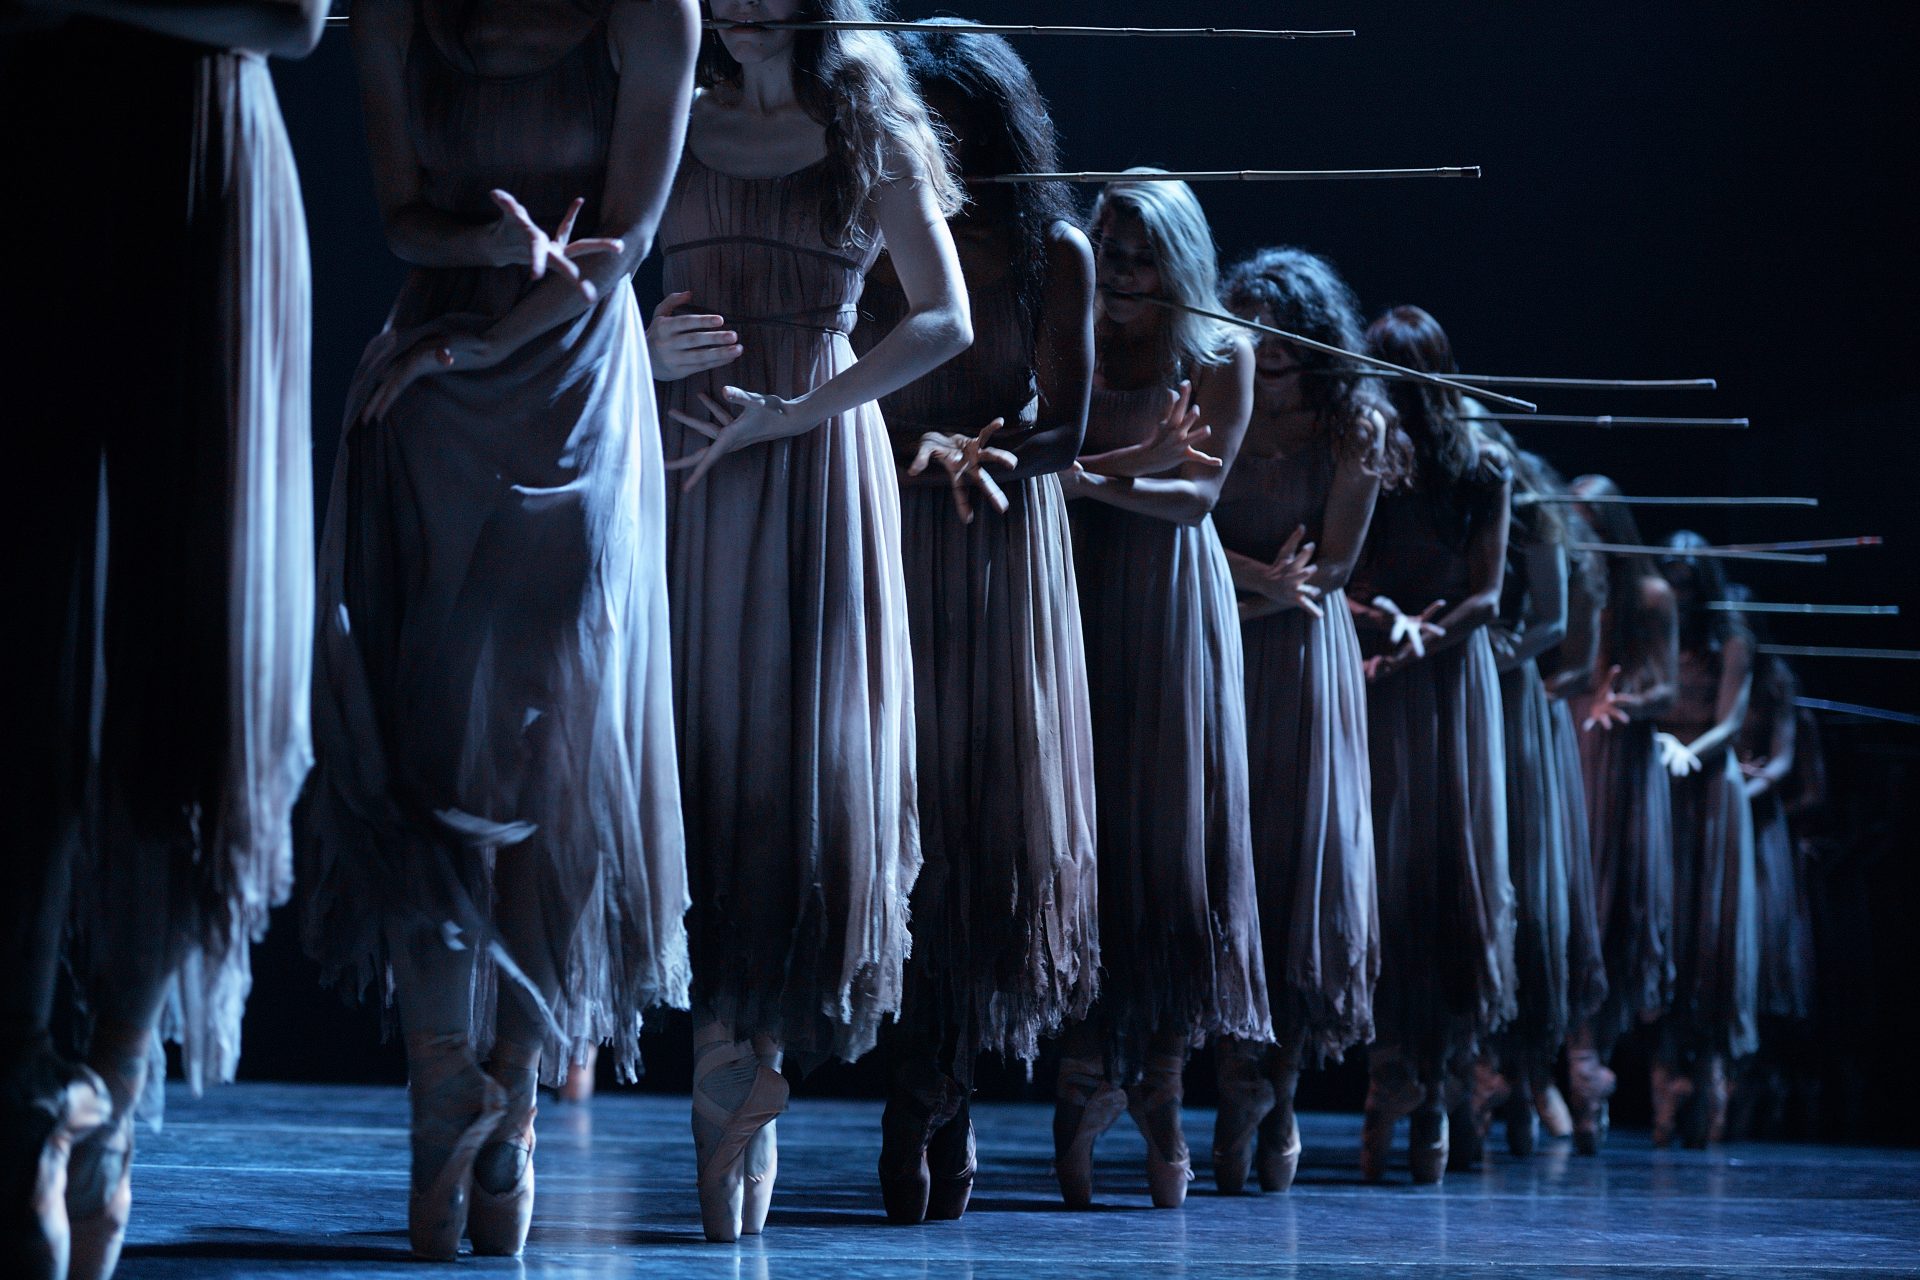 A group of dancers playing the Wilis is standing in a line on pointe shoes. Their arms are outstretched around their chest and they are holding a bamboo stick in their mouths. They are wearing dark dresses over a dark background with low lighting and a menacing atmosphere.